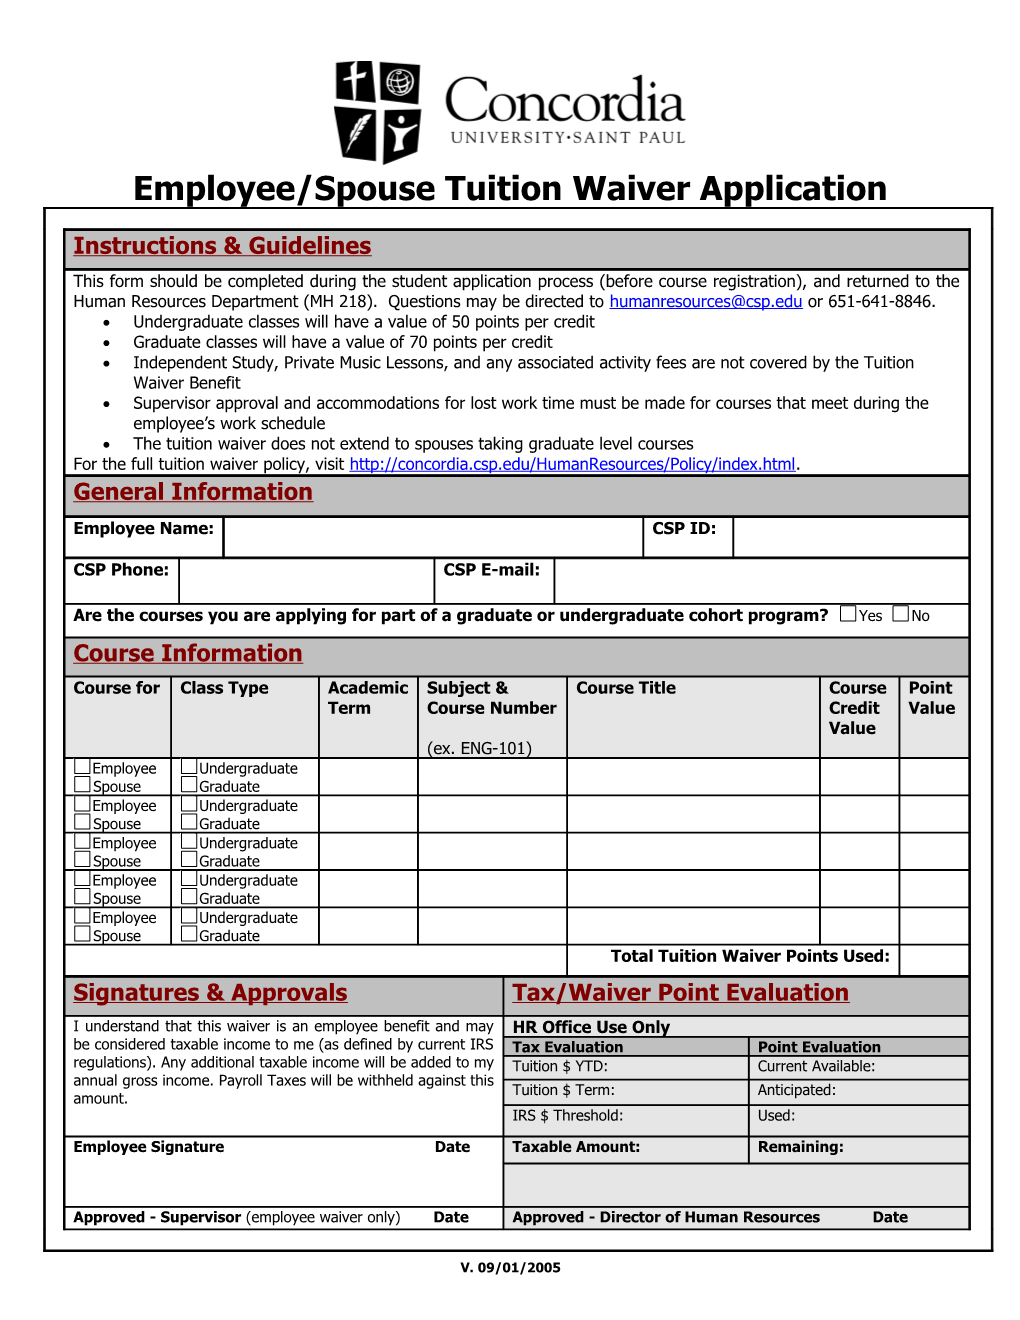 Employee/Spouse Tuition Waiver Application